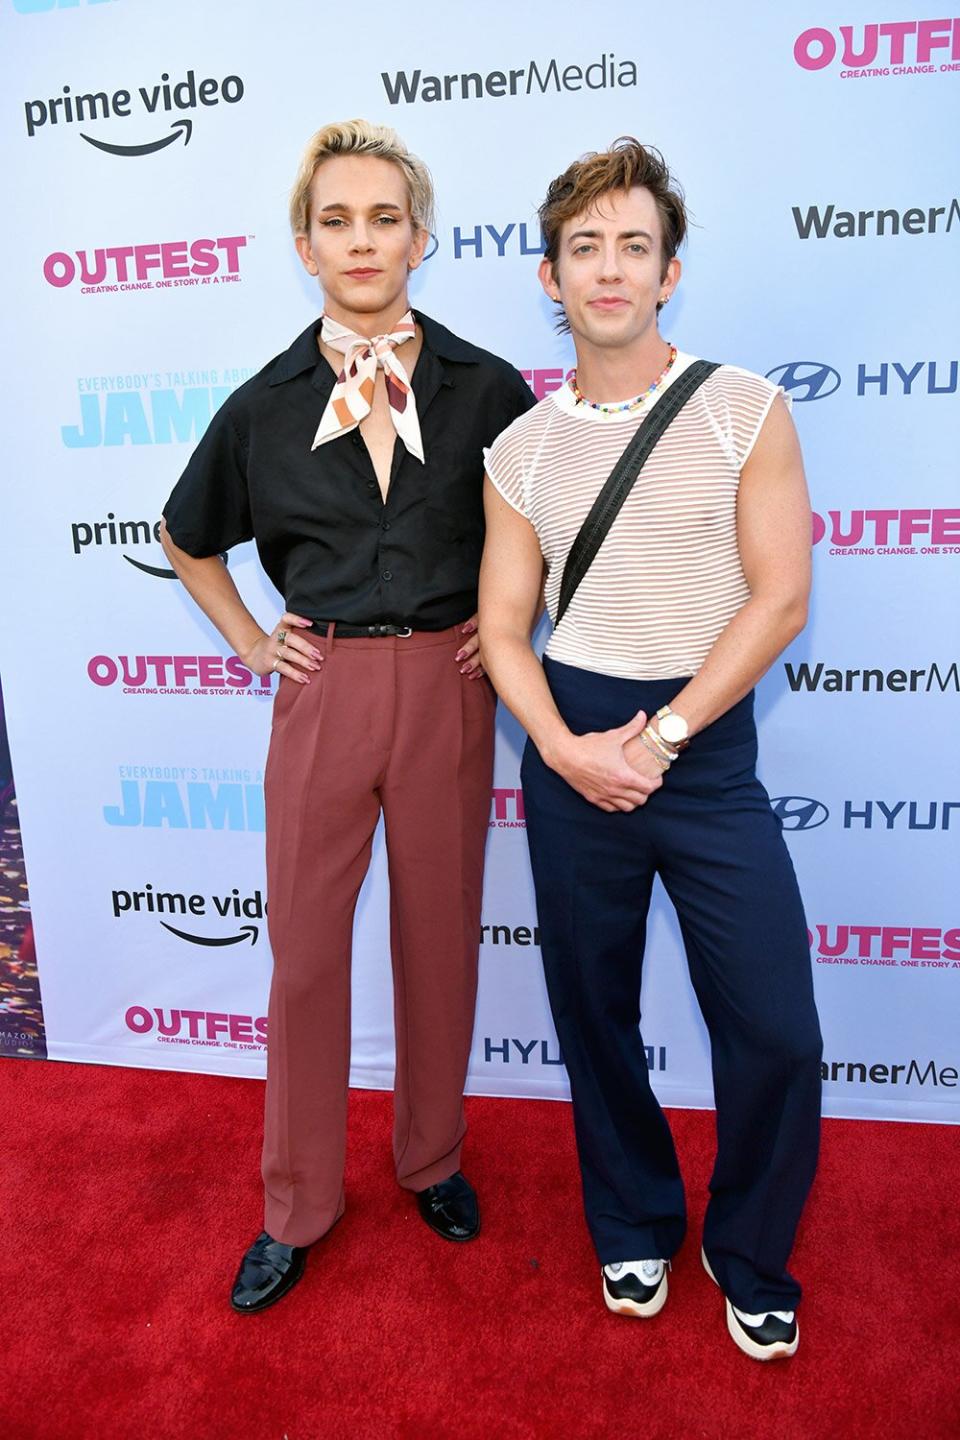 Austin P. McKenzie and Kevin McHale attend the Opening Night Premiere of "Everybody's Talking About Jamie